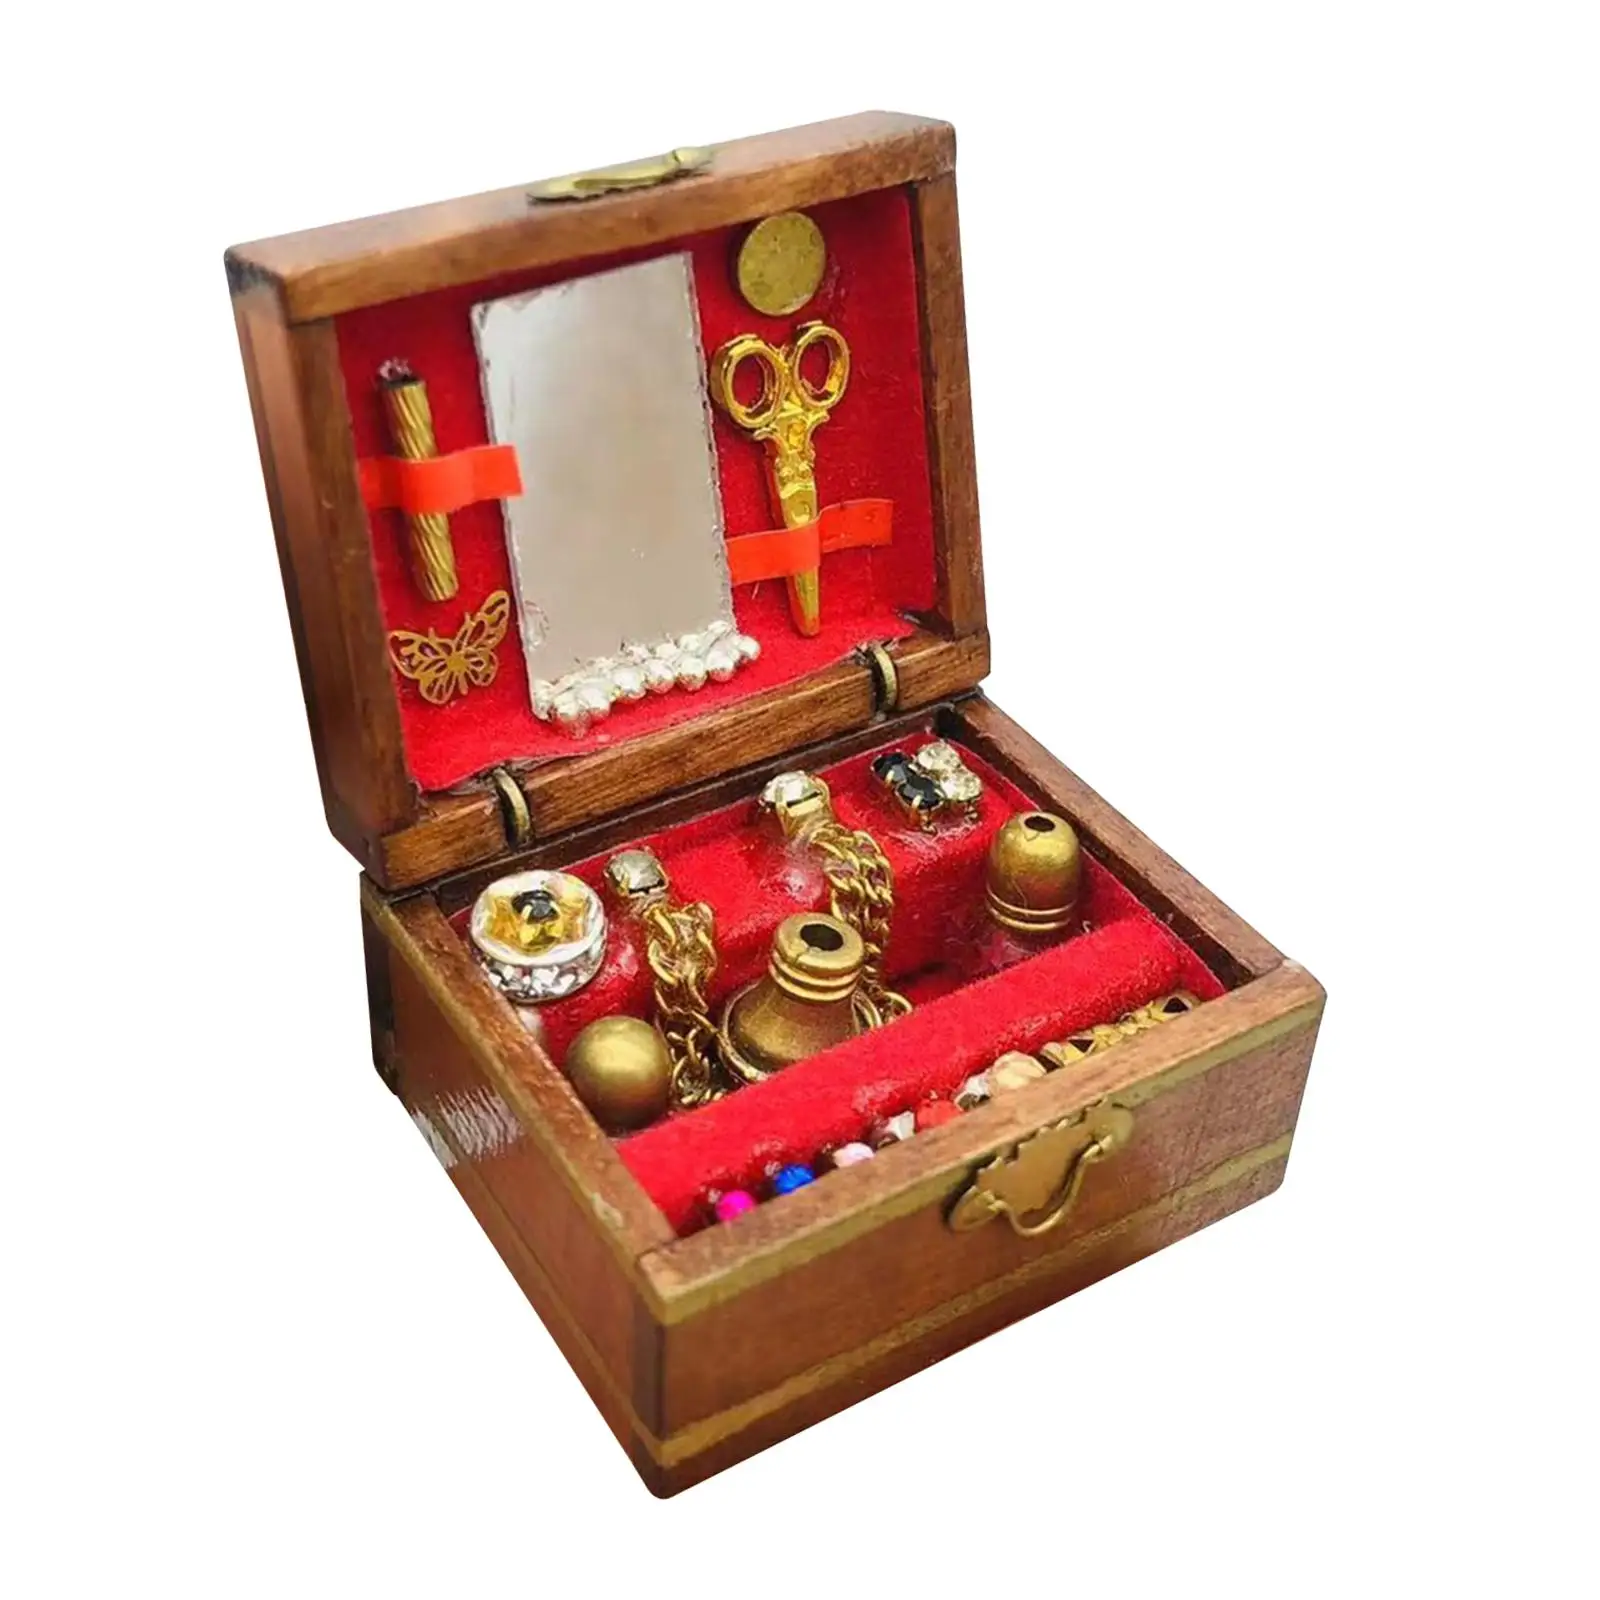 1:12 Doll House Retro Wooden Treasure Chest Mini Model Smooth Surface and Polished Exquisite Workmanship Jewelry Case Organizer